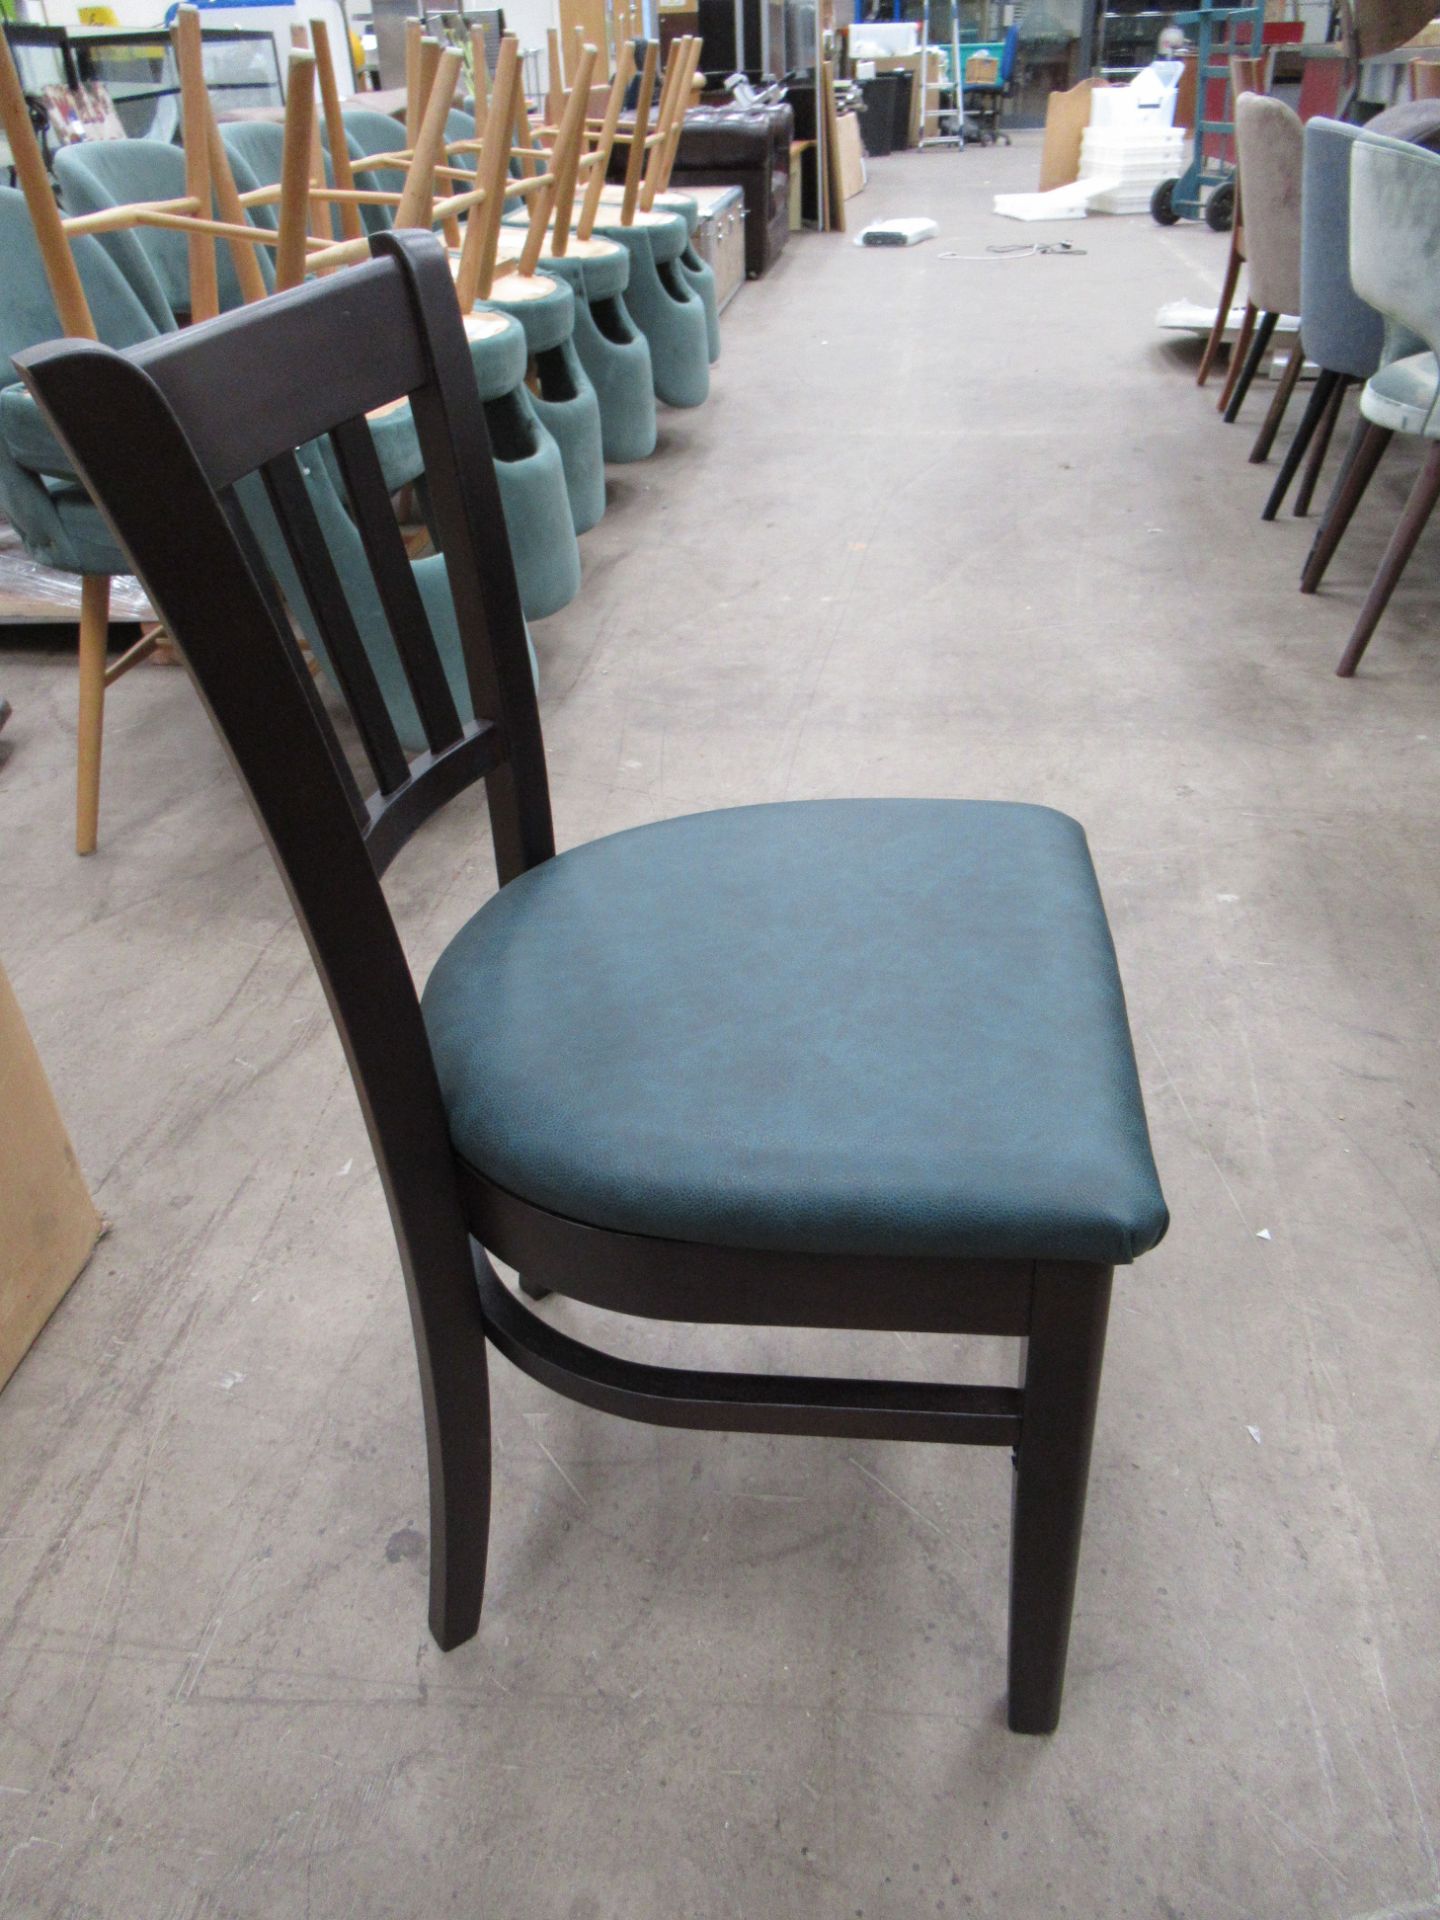 2x Holt UPH Seats - colour Raw - Image 3 of 3